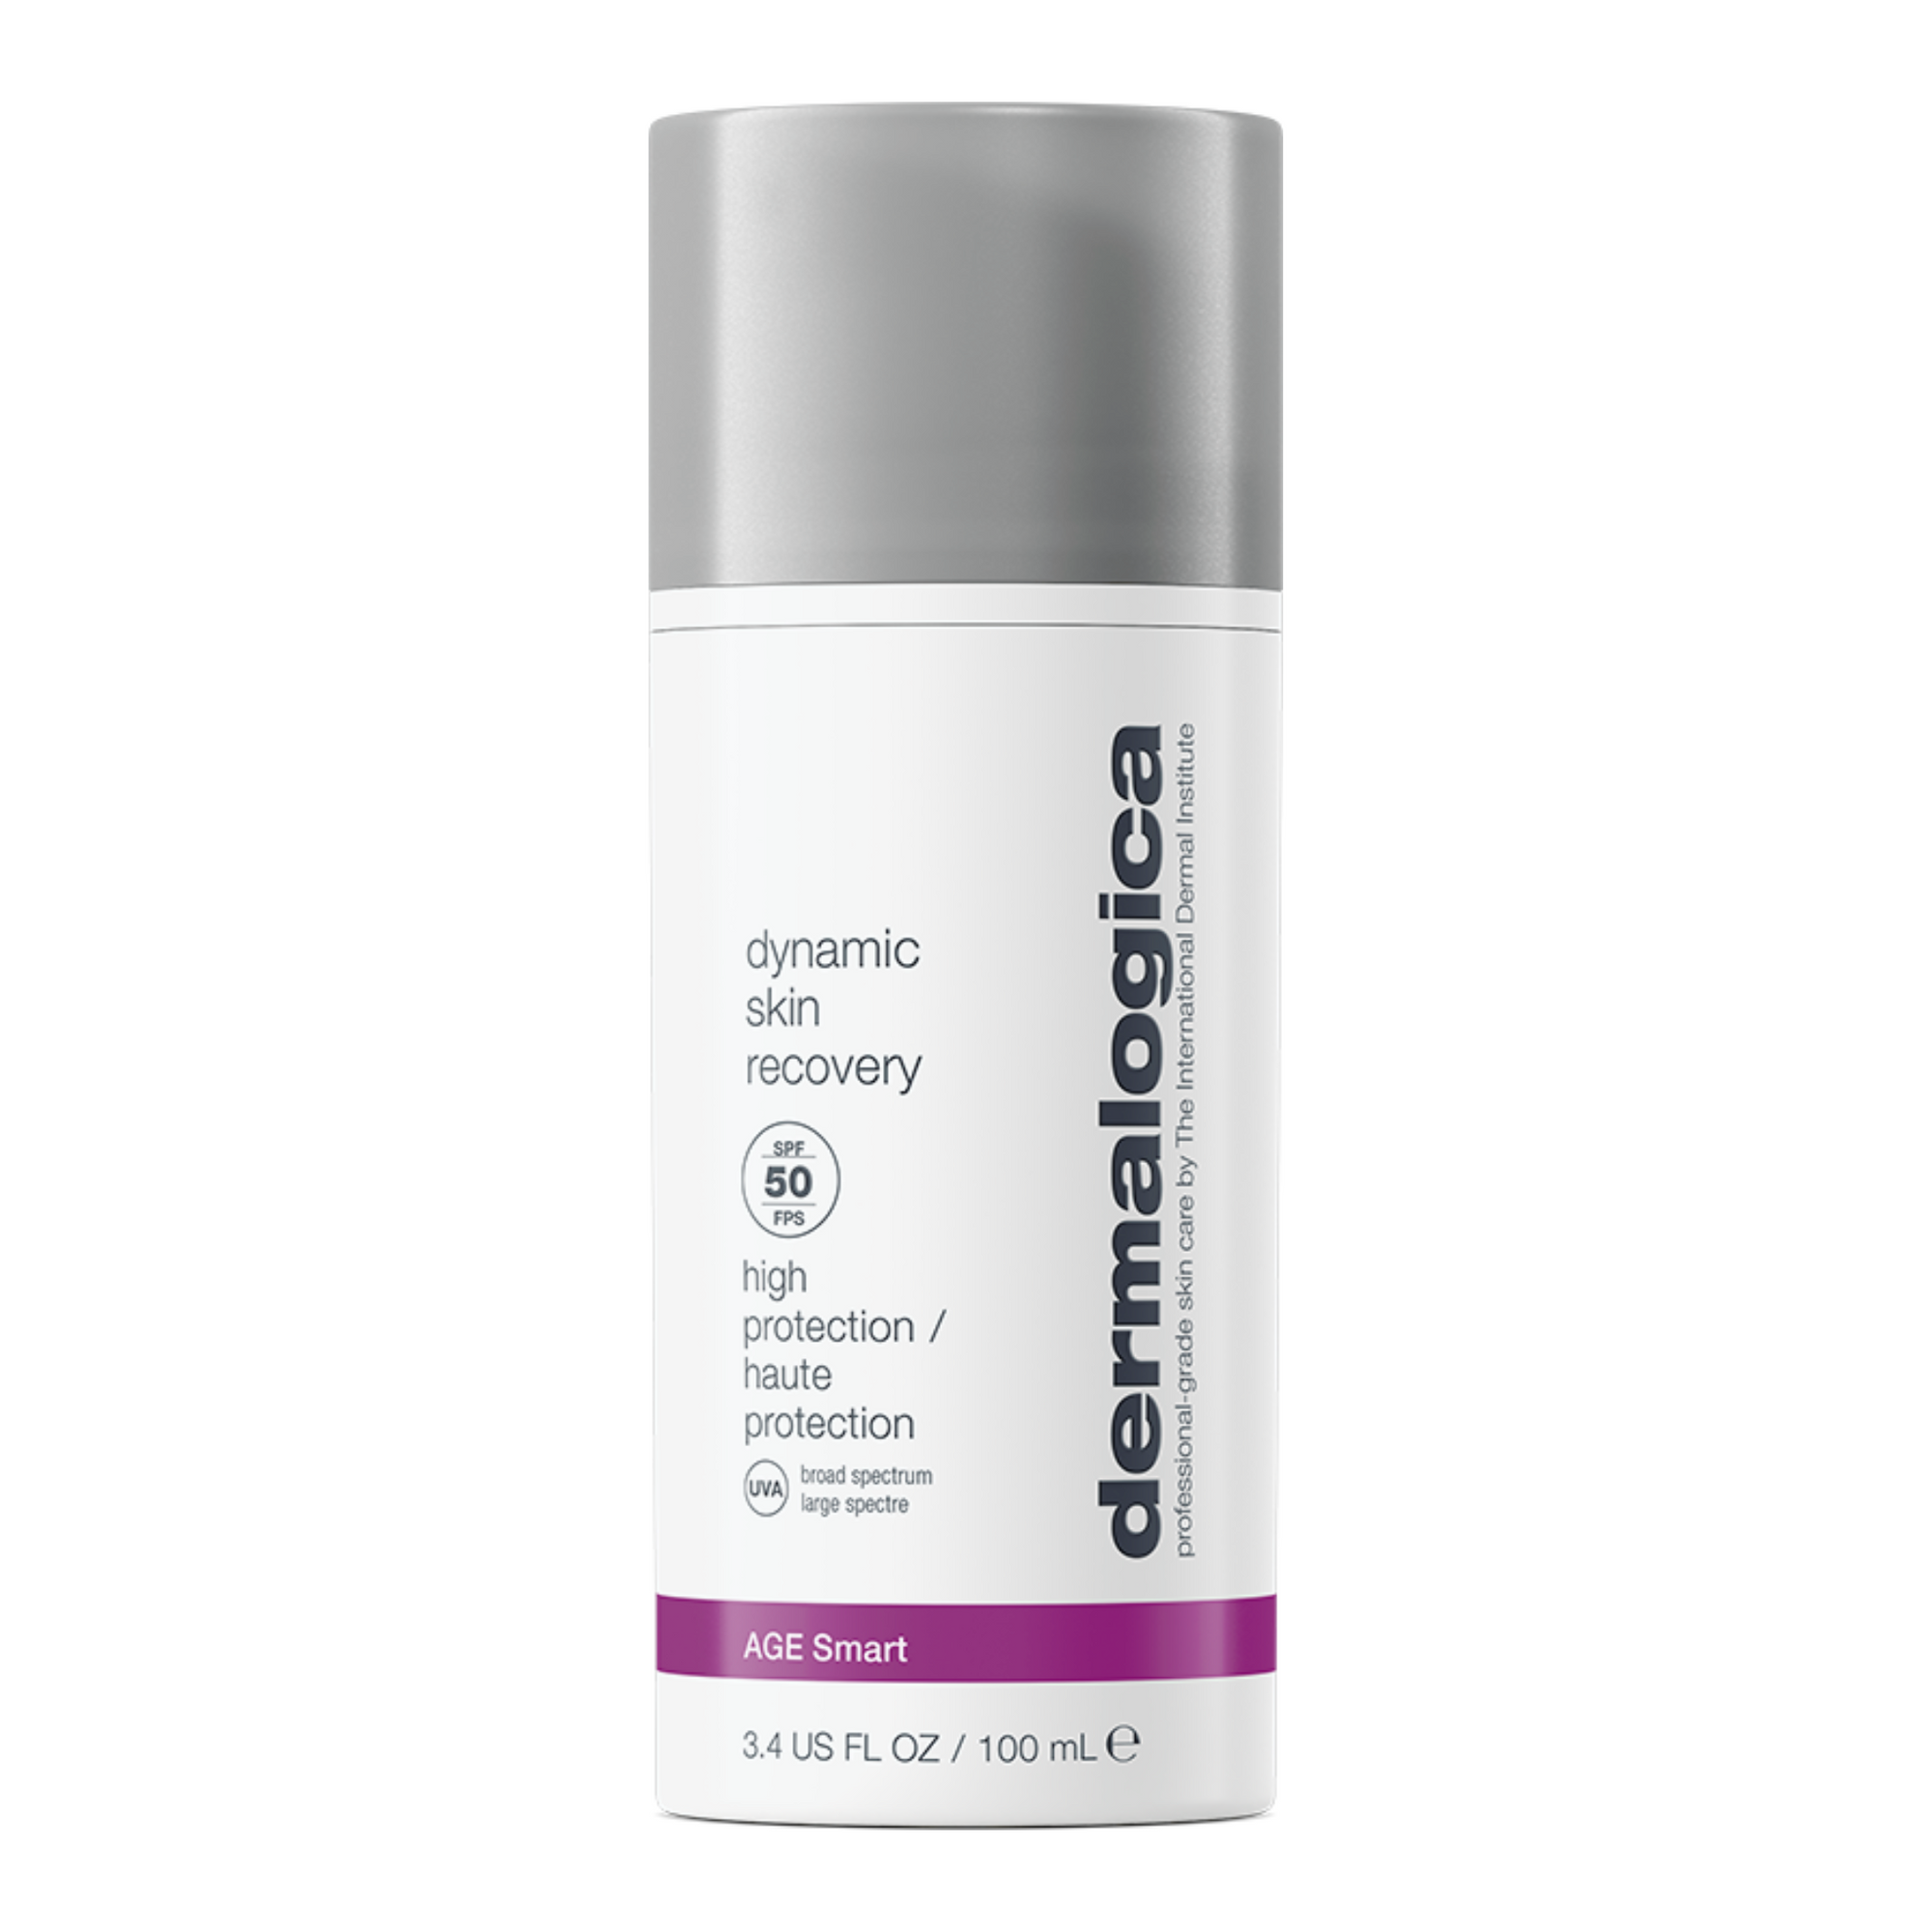 Dermalogica Dynamic Skin Recovery SPF50 100ml Limited Edition Jumbo